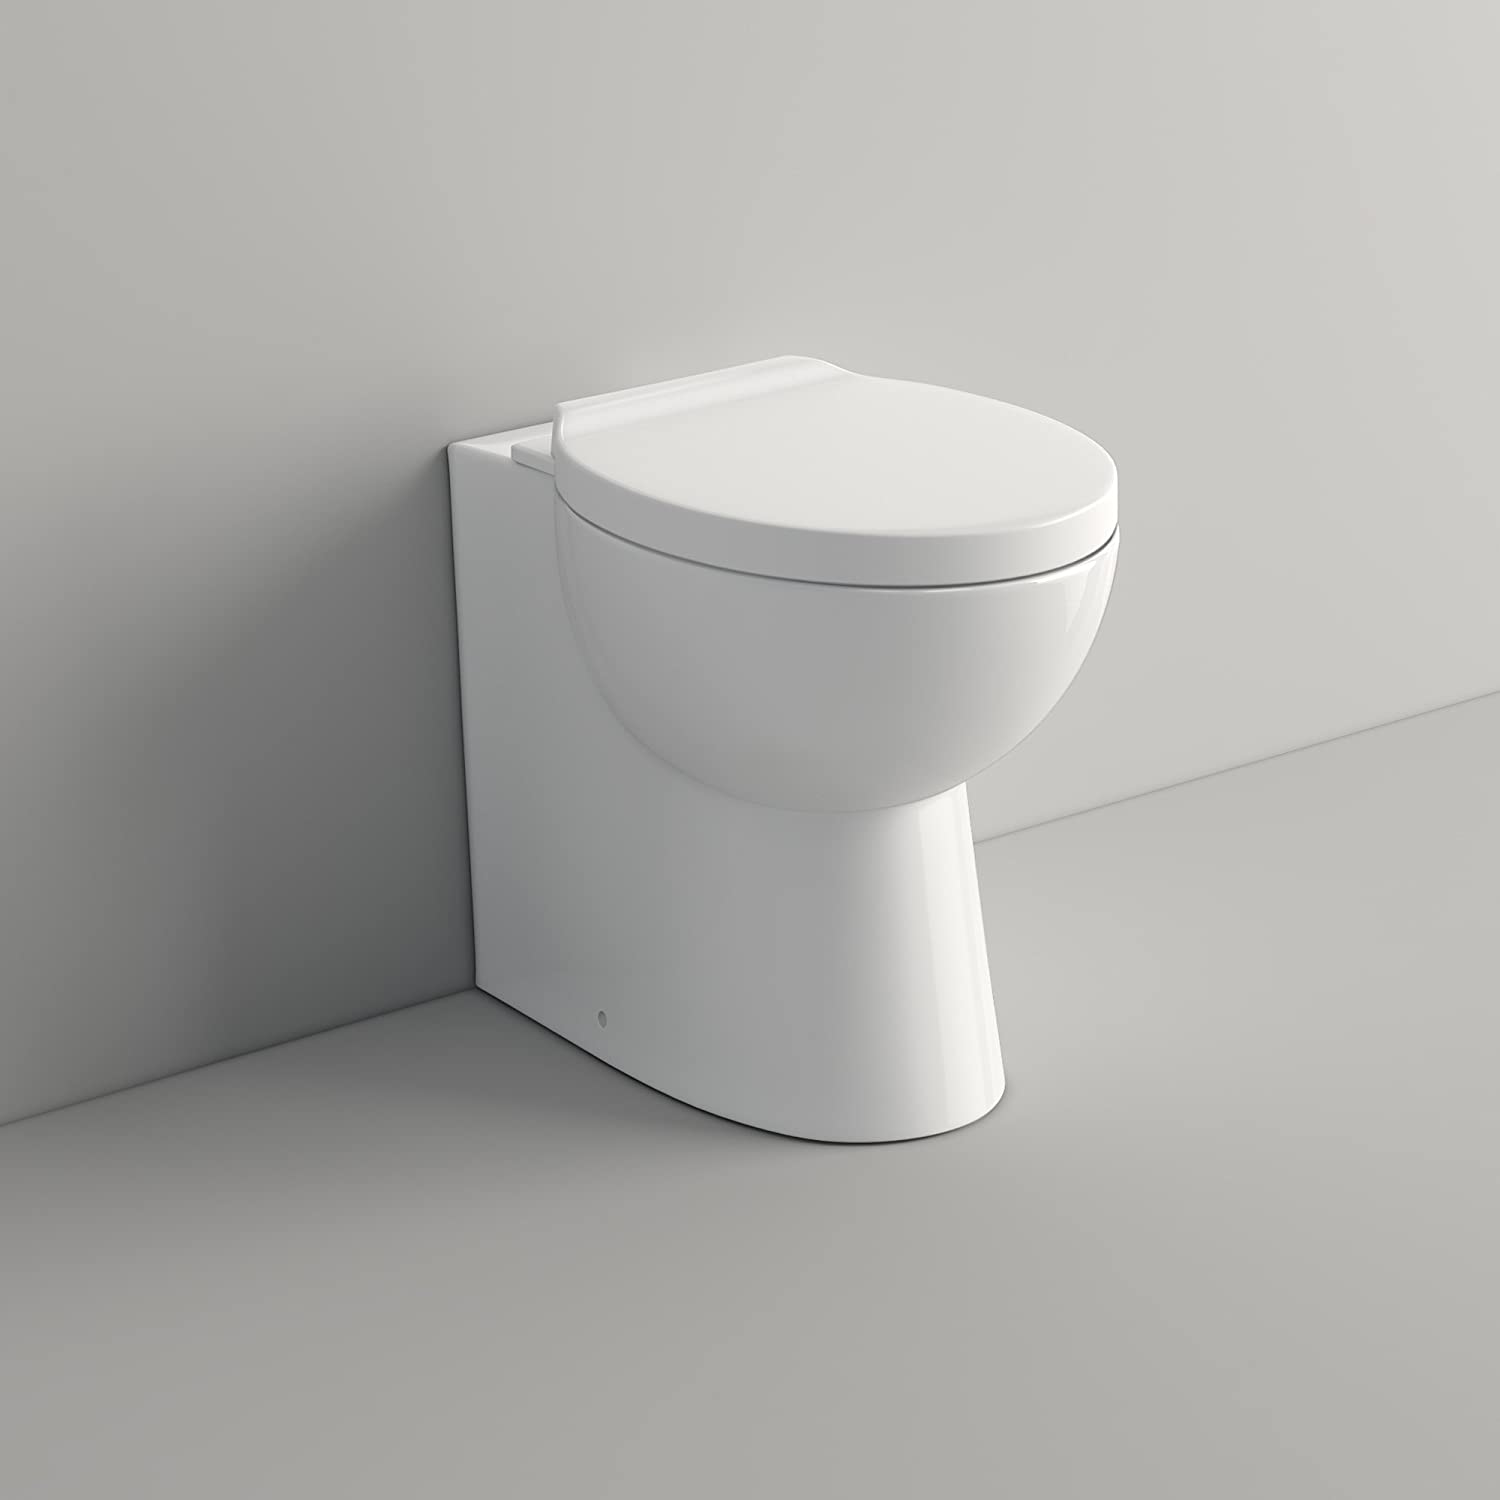 Modern WC Unit with Back to Wall Toilet & Soft Close Seat, Gloss White. Ideal bathroom solution with contemporary design, UK trend.